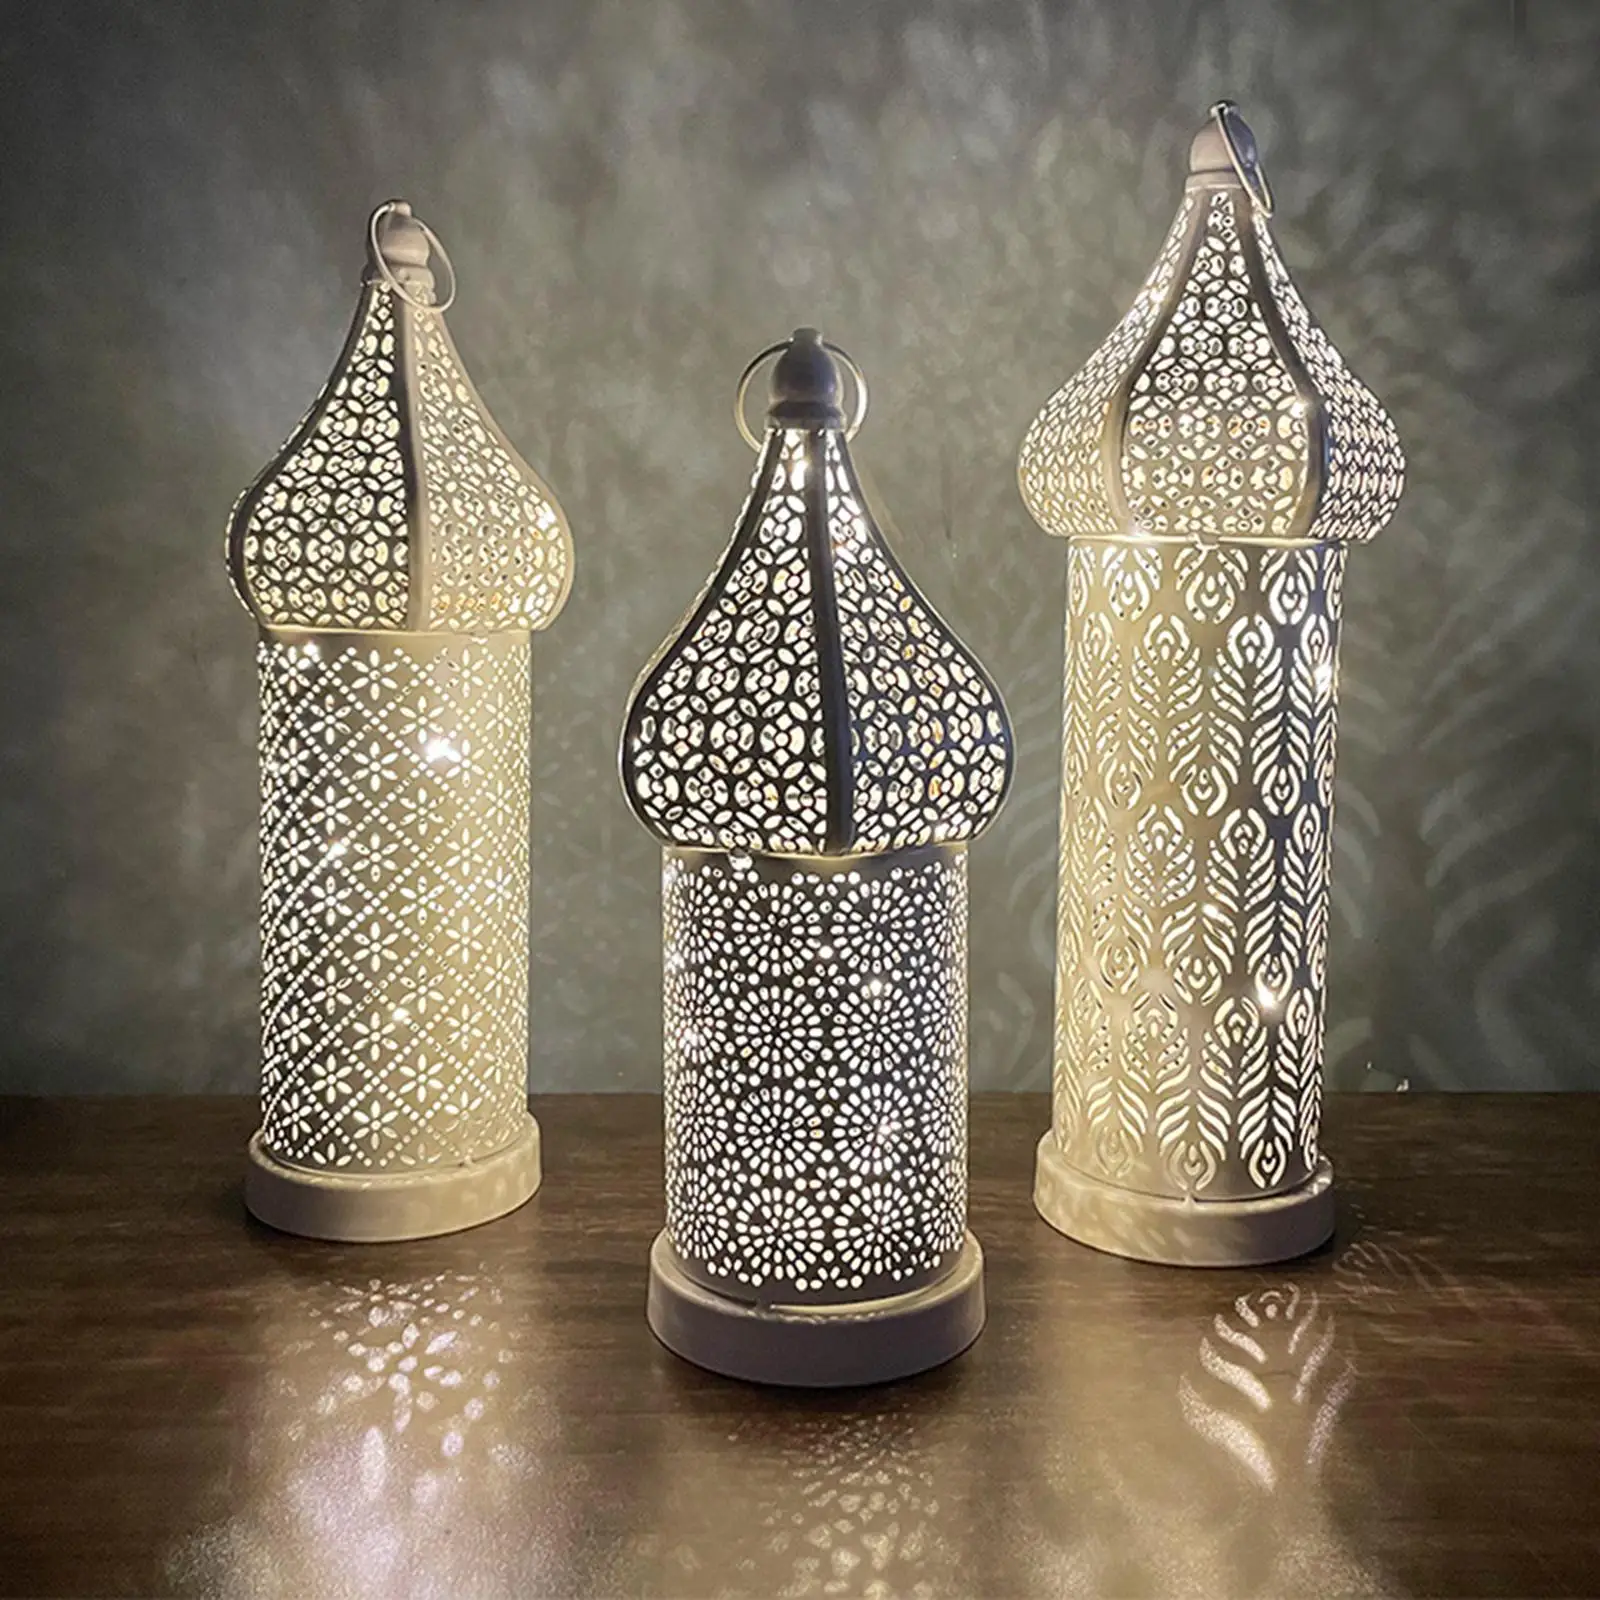 Retro Style Moroccan Lantern Light Props Desk Lamp for Wedding Party Living Room